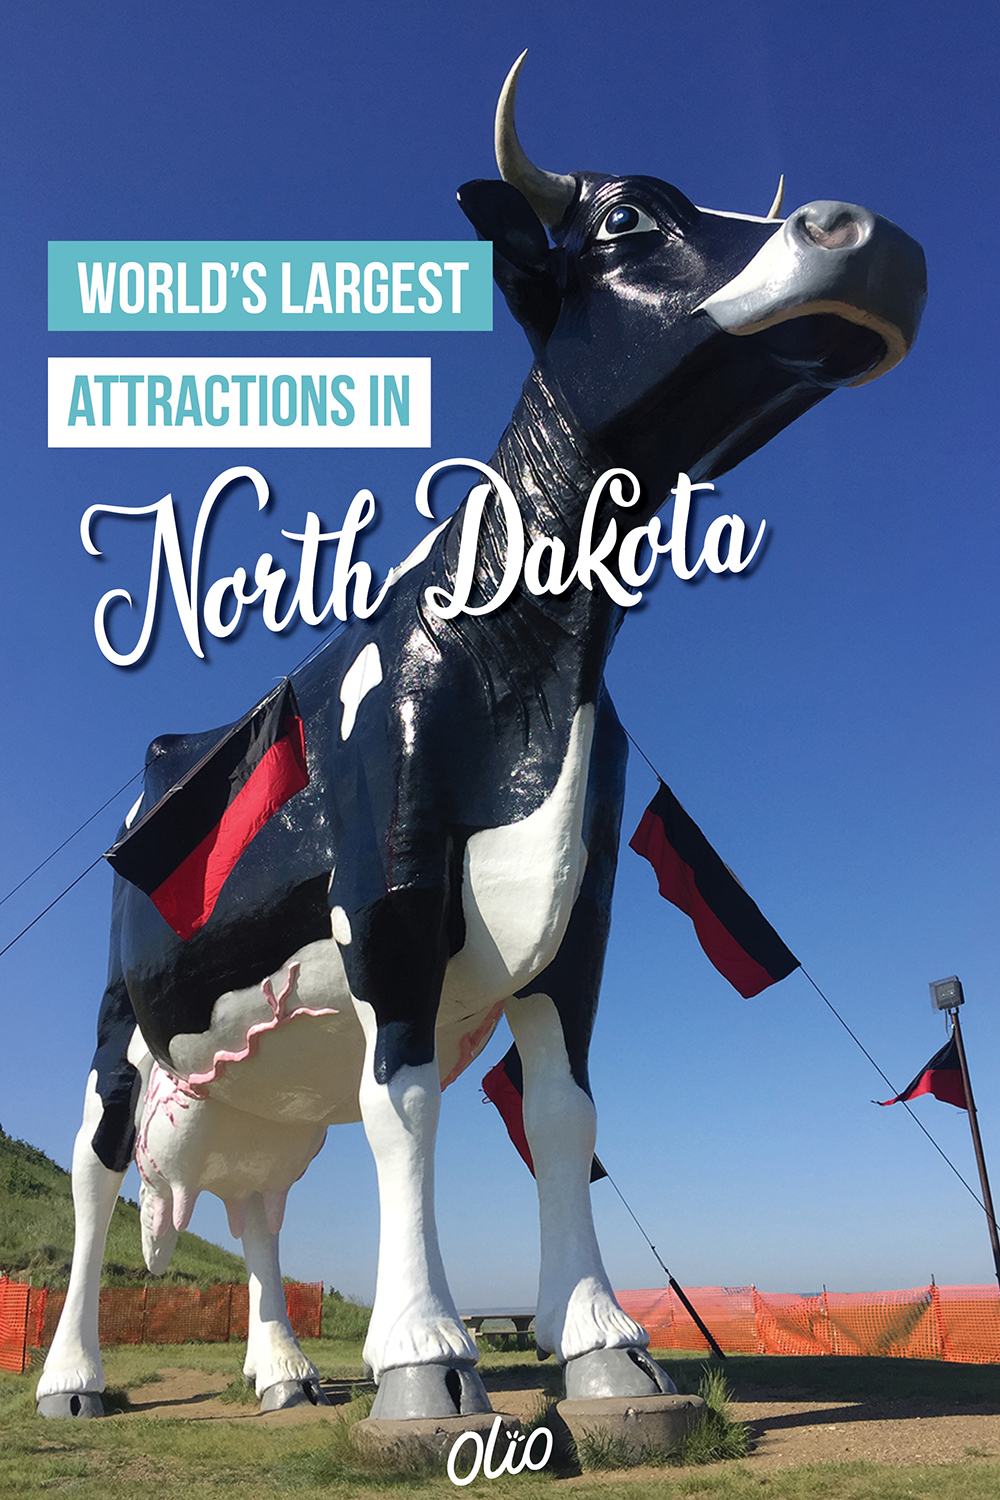 Plan a North Dakota road trip that's larger than life! There's tons of things to do in North Dakota, including stops at many of these large roadside attractions. Pose for funny photos at these "world's largest" things and cross these towering statues off your bucket list! #NorthDakota #WorldsLargest